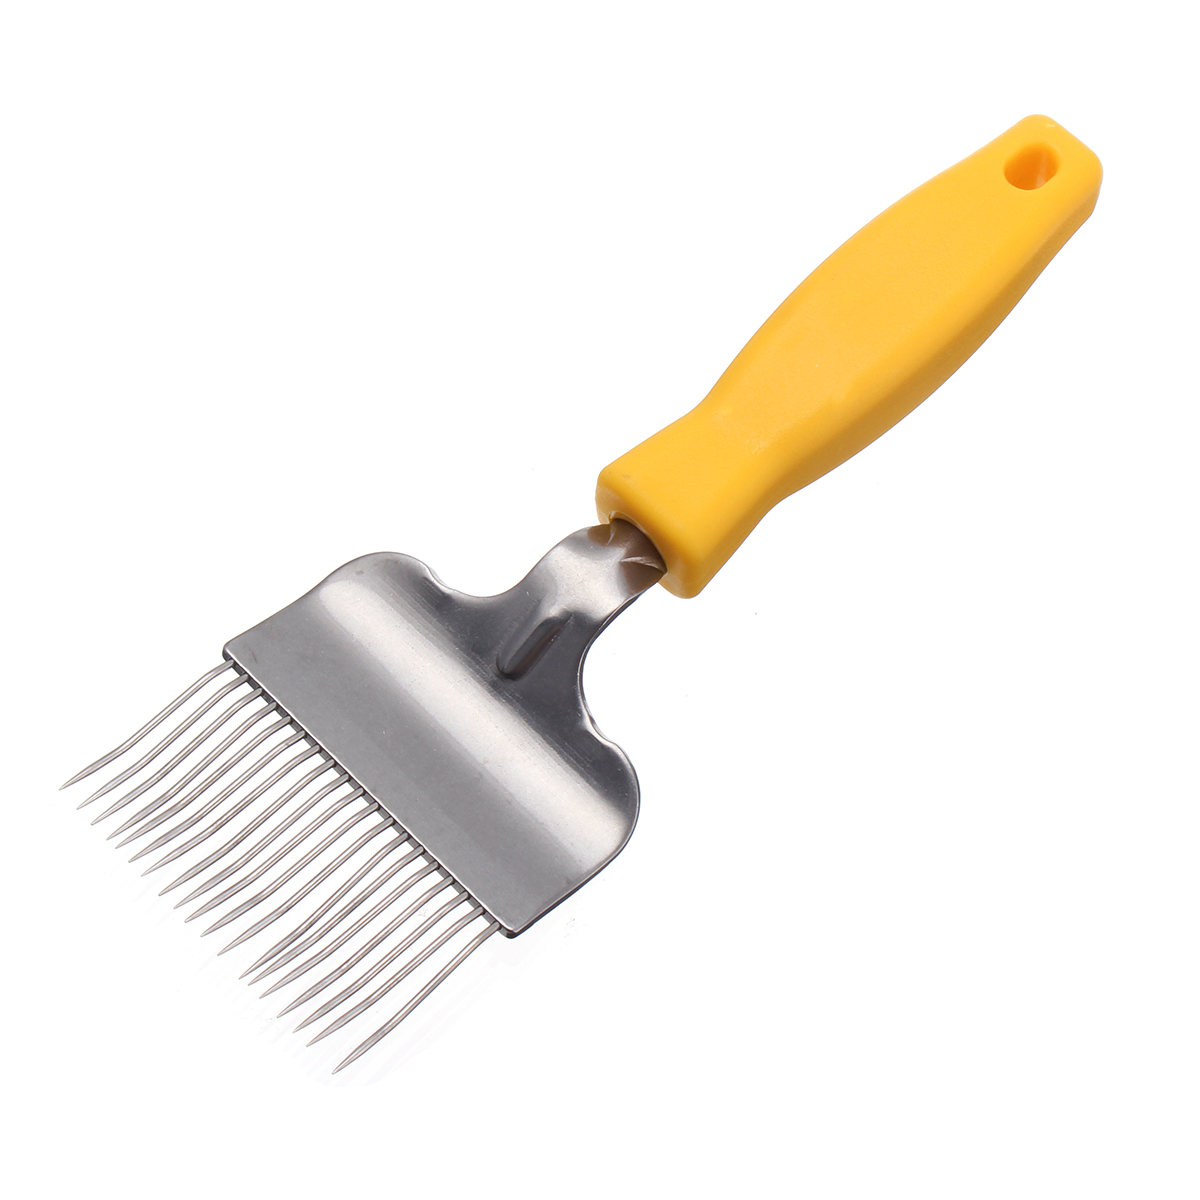 Stainless-Steel-Bee-Keeping-Honey-Comb-Beekeeping-Tine-Uncapping-Fork-Scratcher-1311962